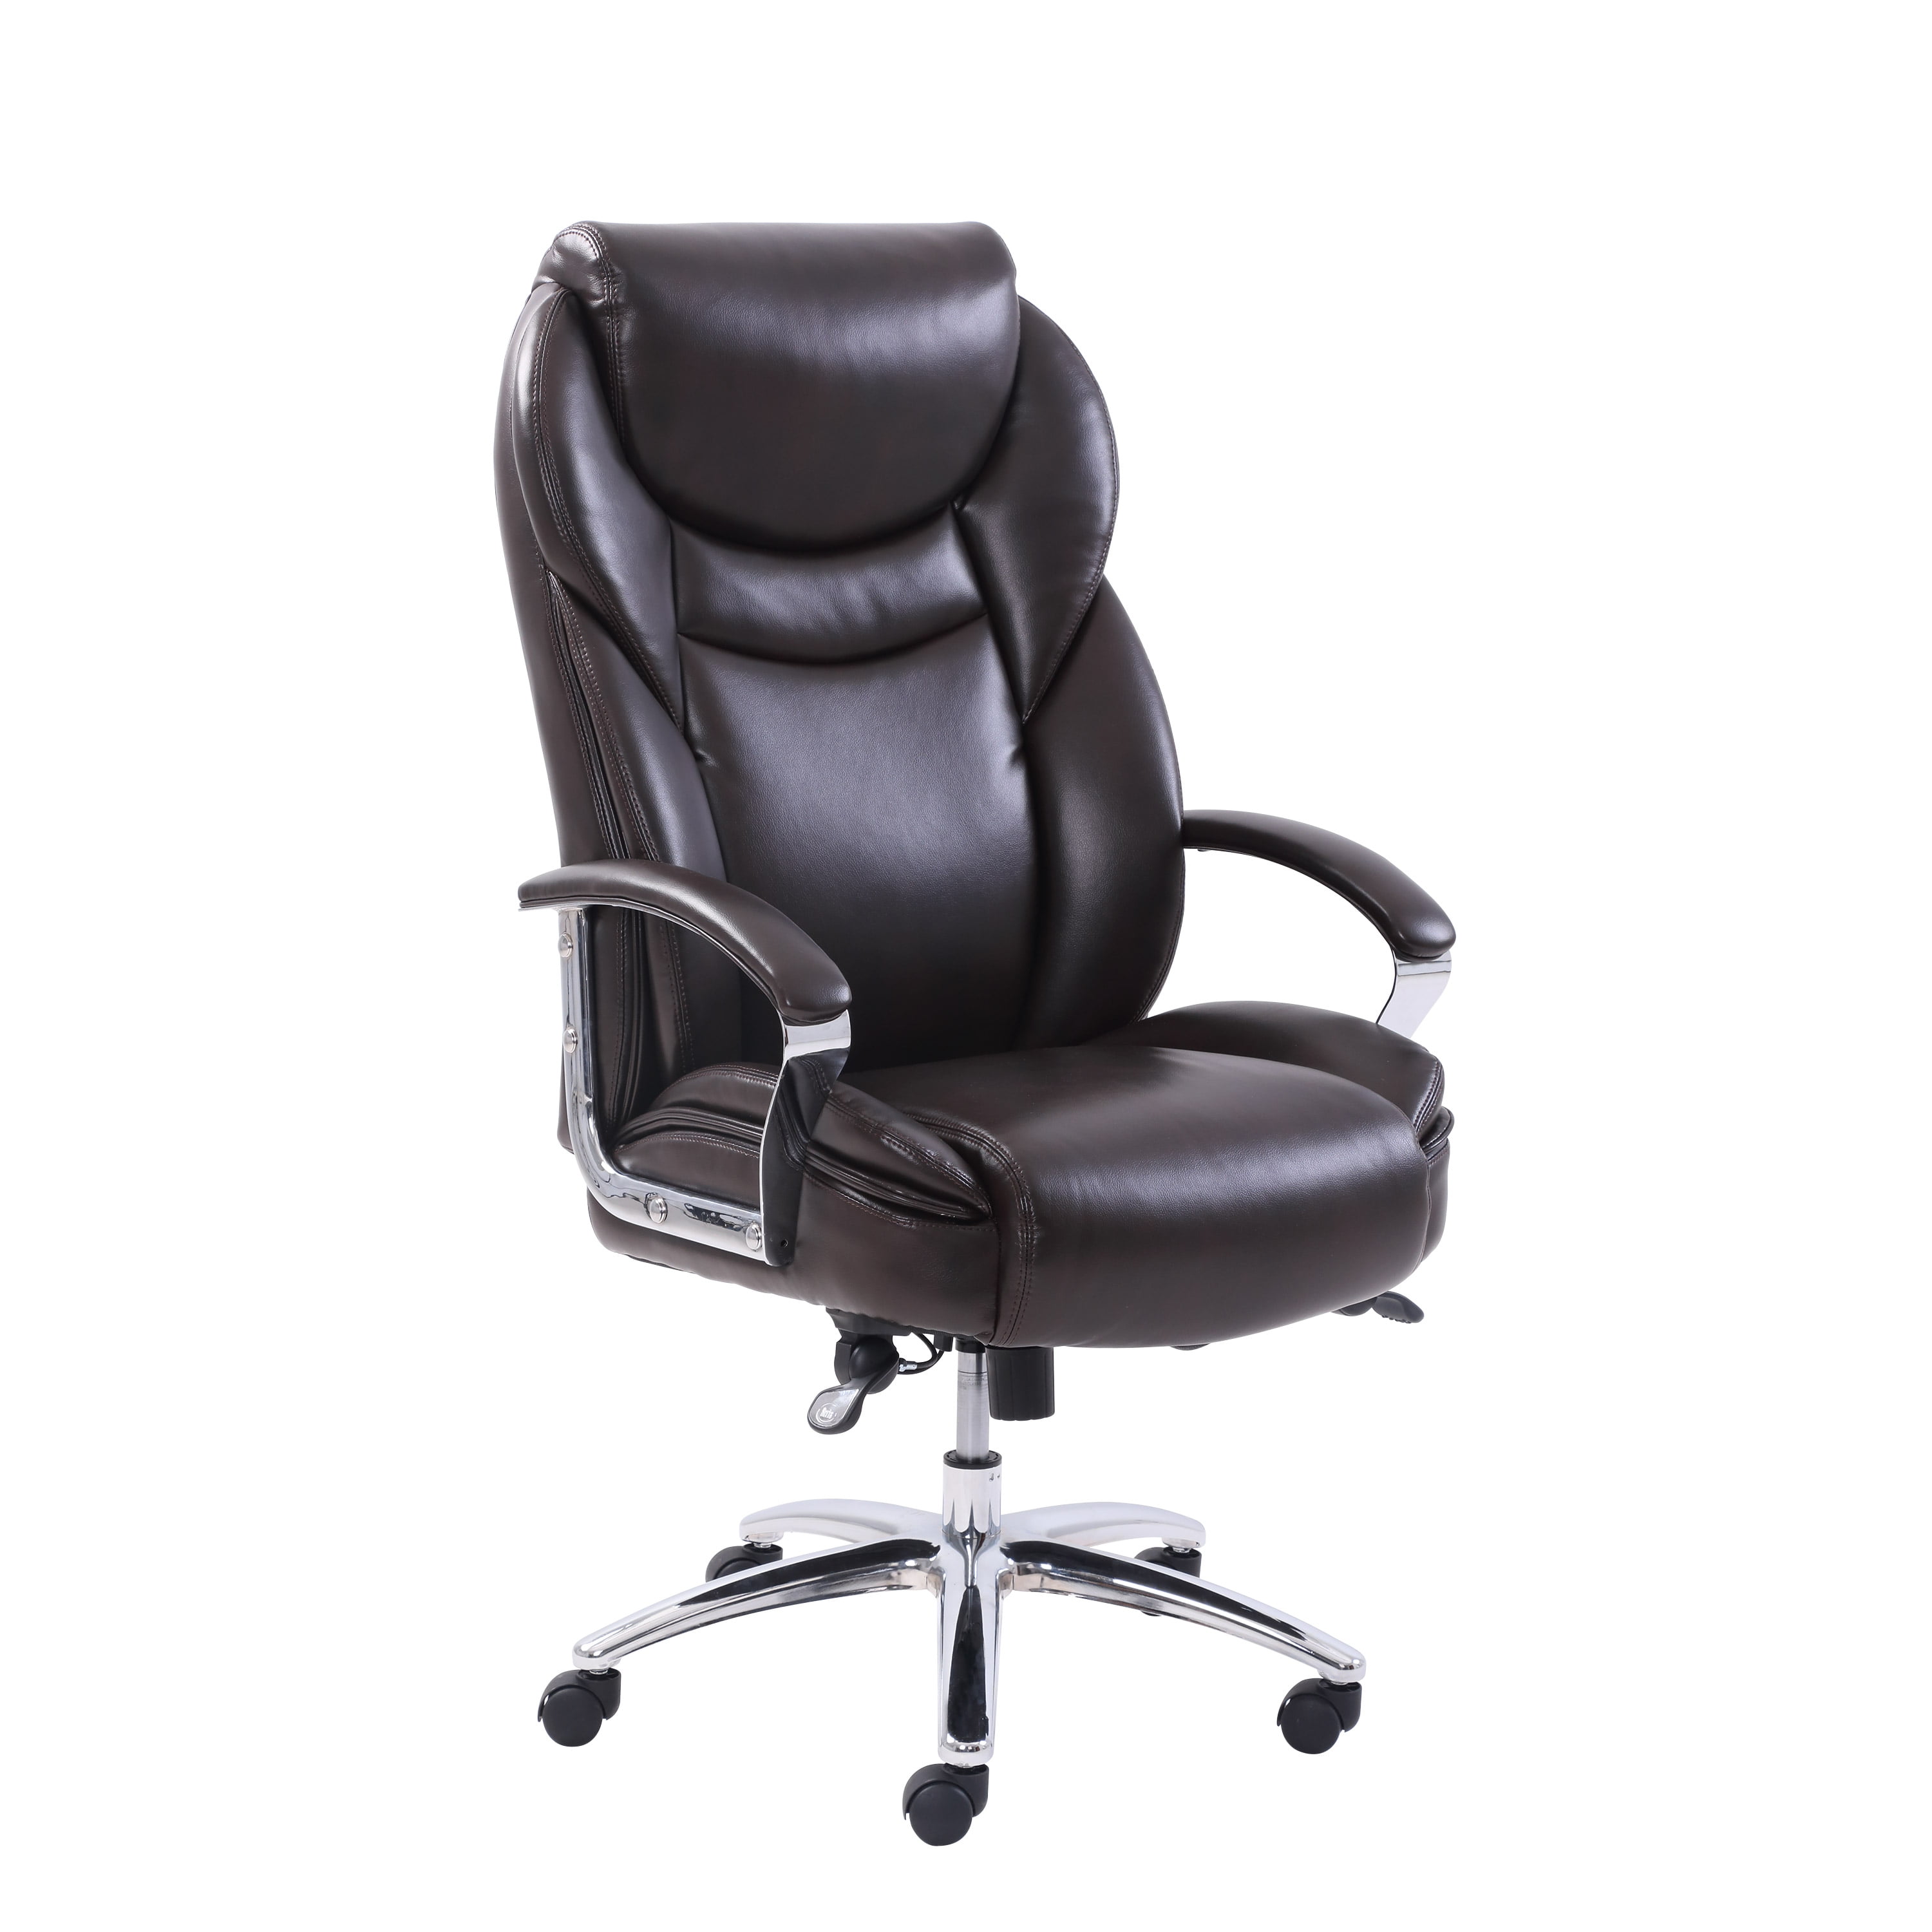 Serta Big Tall Office Chair With, Serta Big And Tall Office Chair Instructions